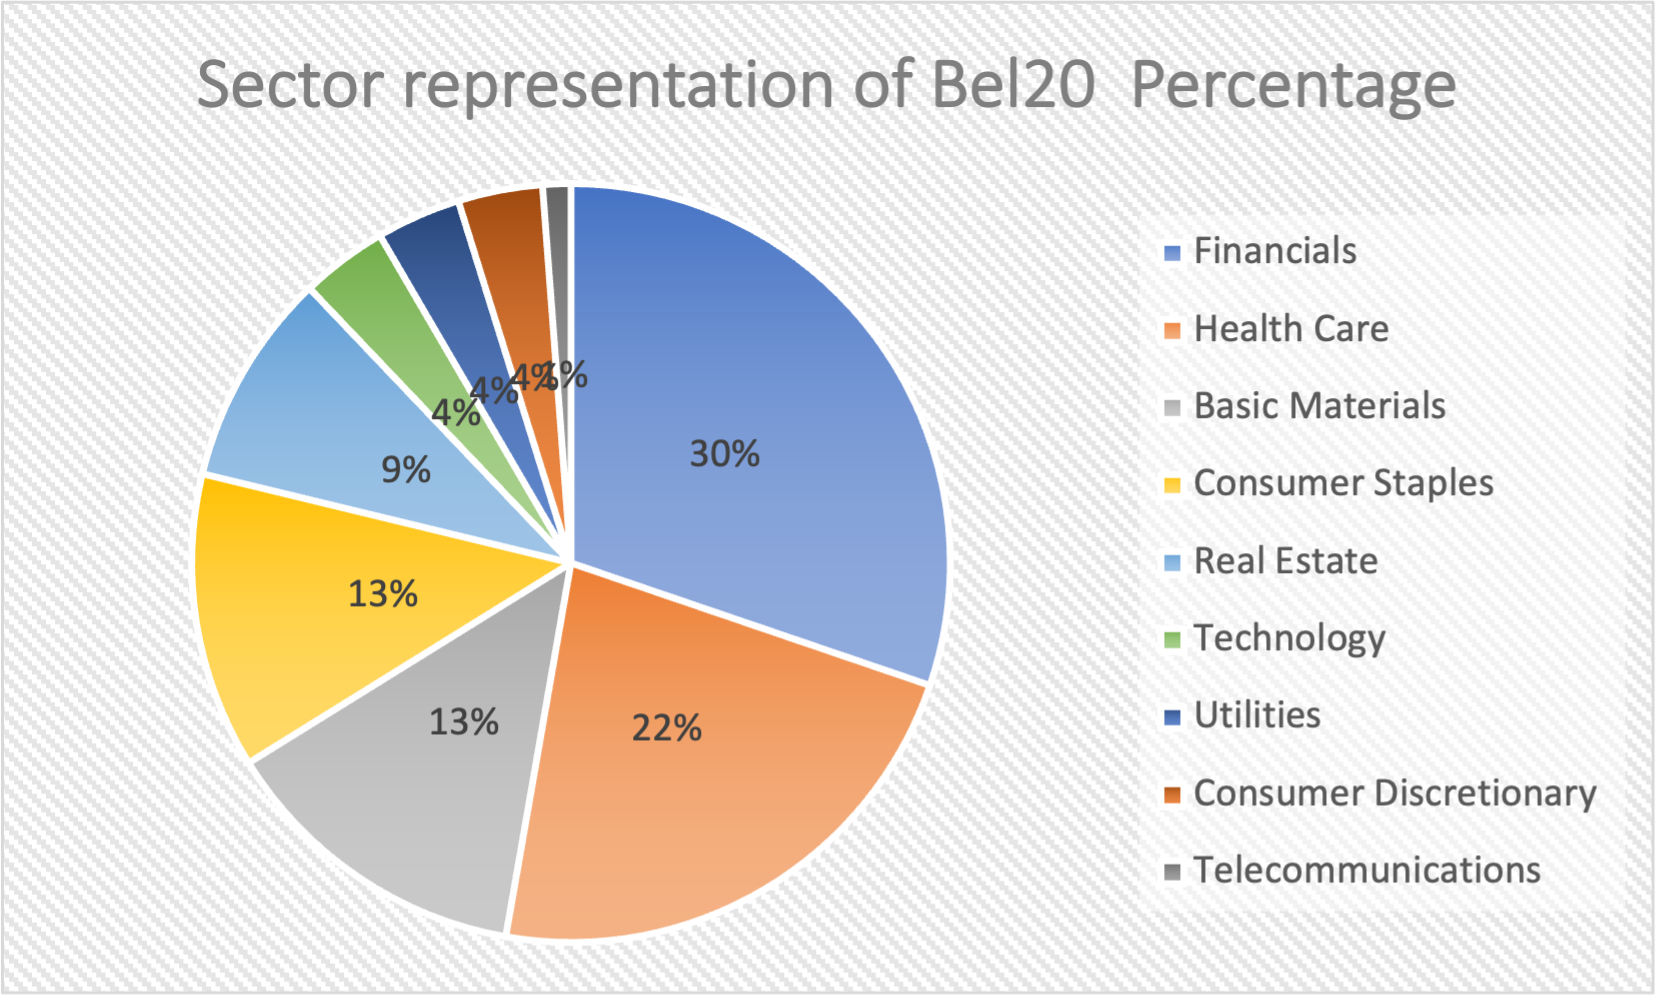 Sector representation in the BEL 20 index